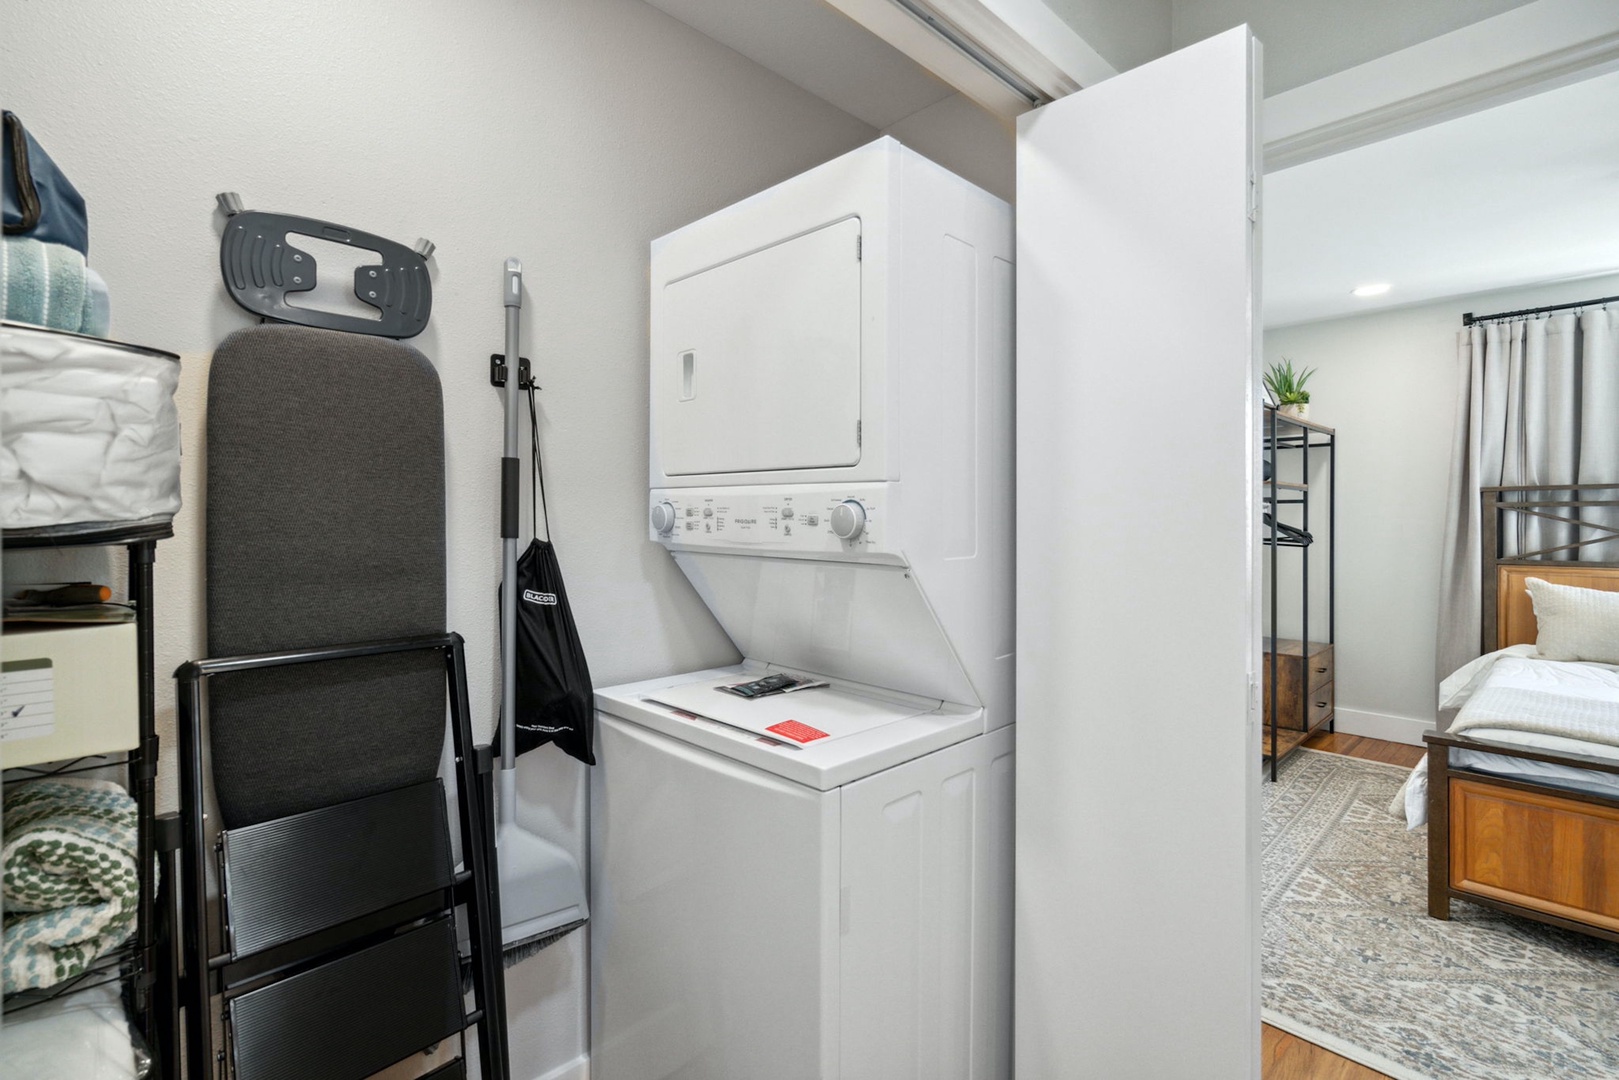 The Guest House offers private laundry, tucked away near the full bath